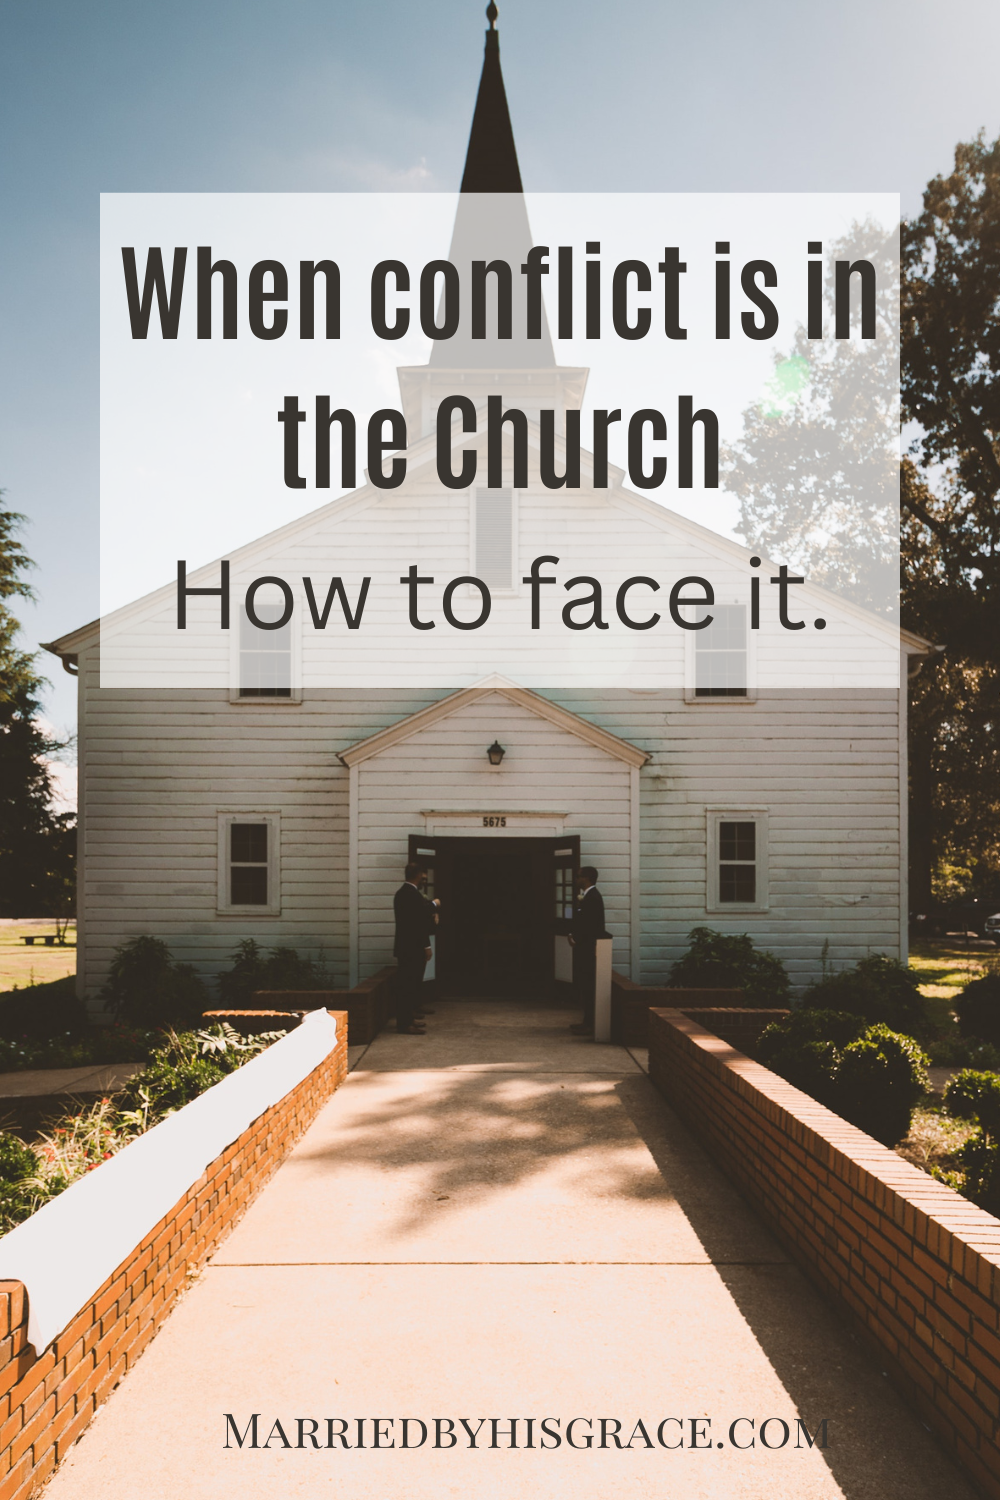 Conflict in the church